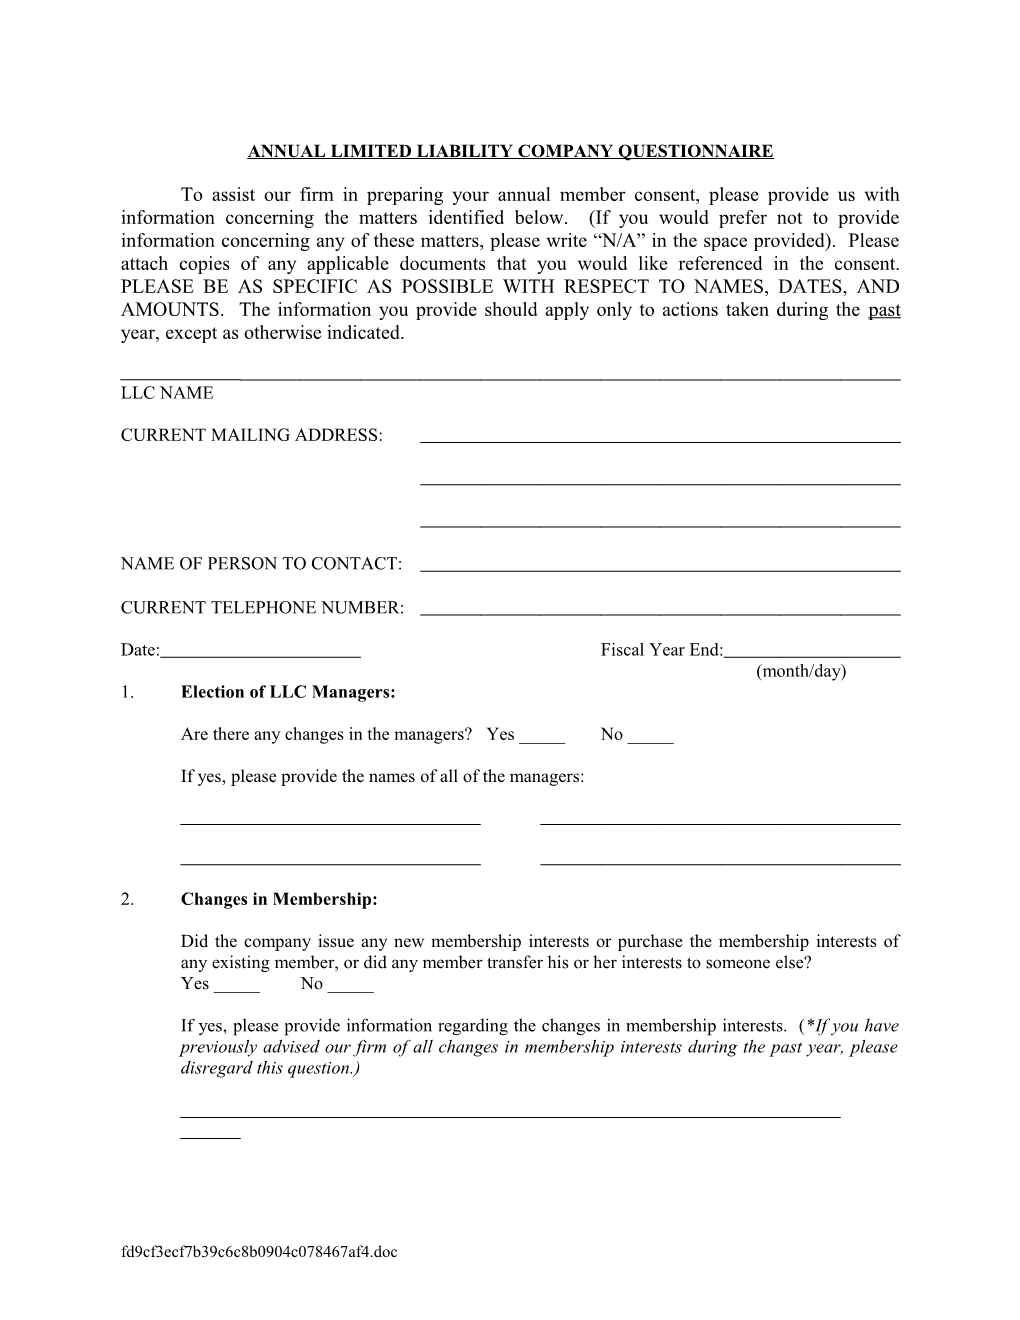 Annual Limited Liability Company Questionnaire